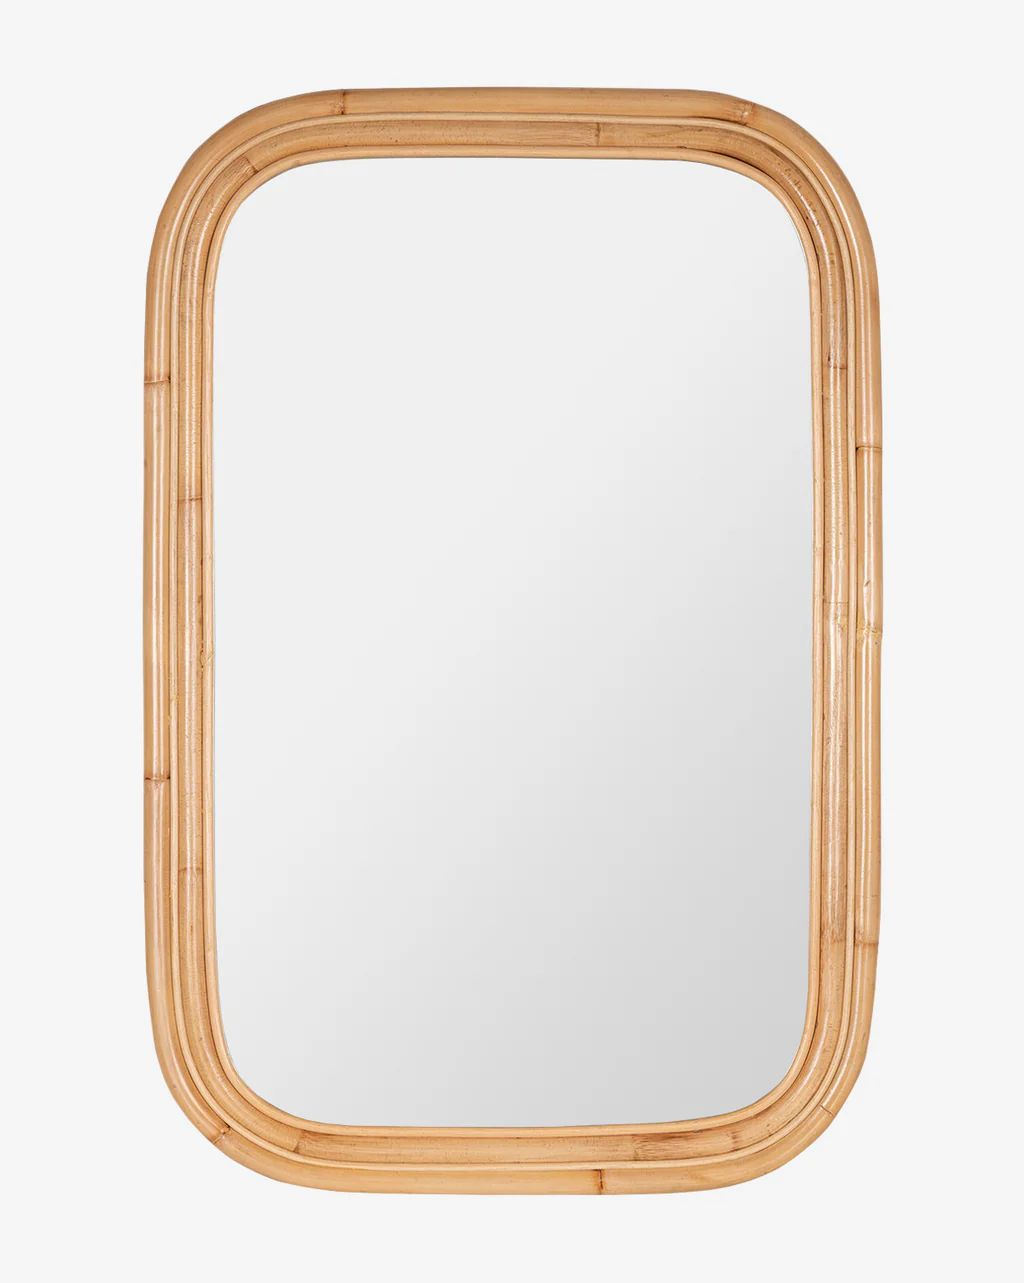 Kendry Wall Mirror | McGee & Co.